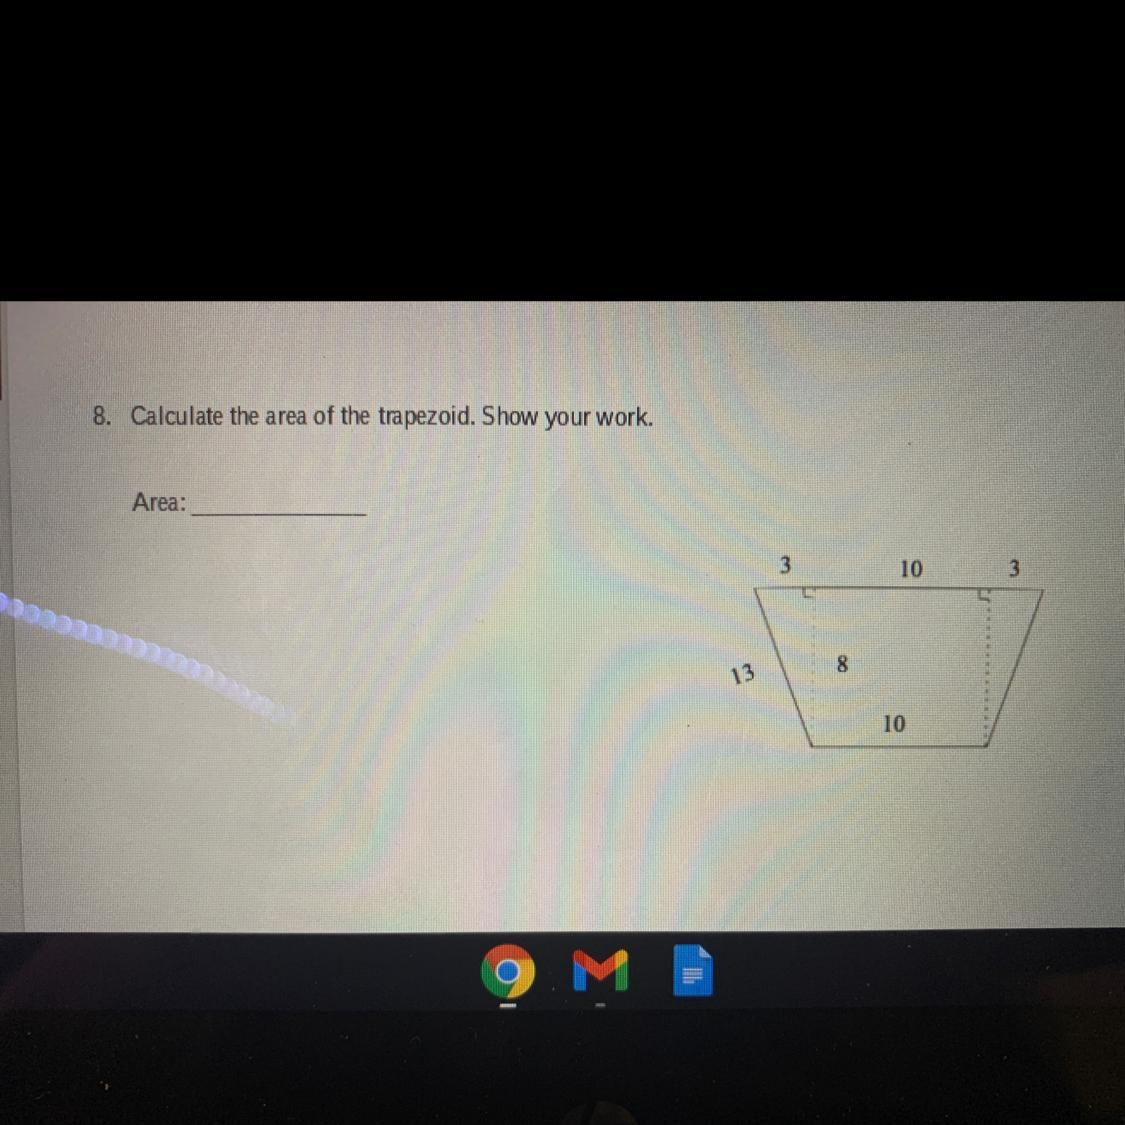 (Brainliest To Whoever Answers Correctly) What Is The Area Of The Trapezoid?